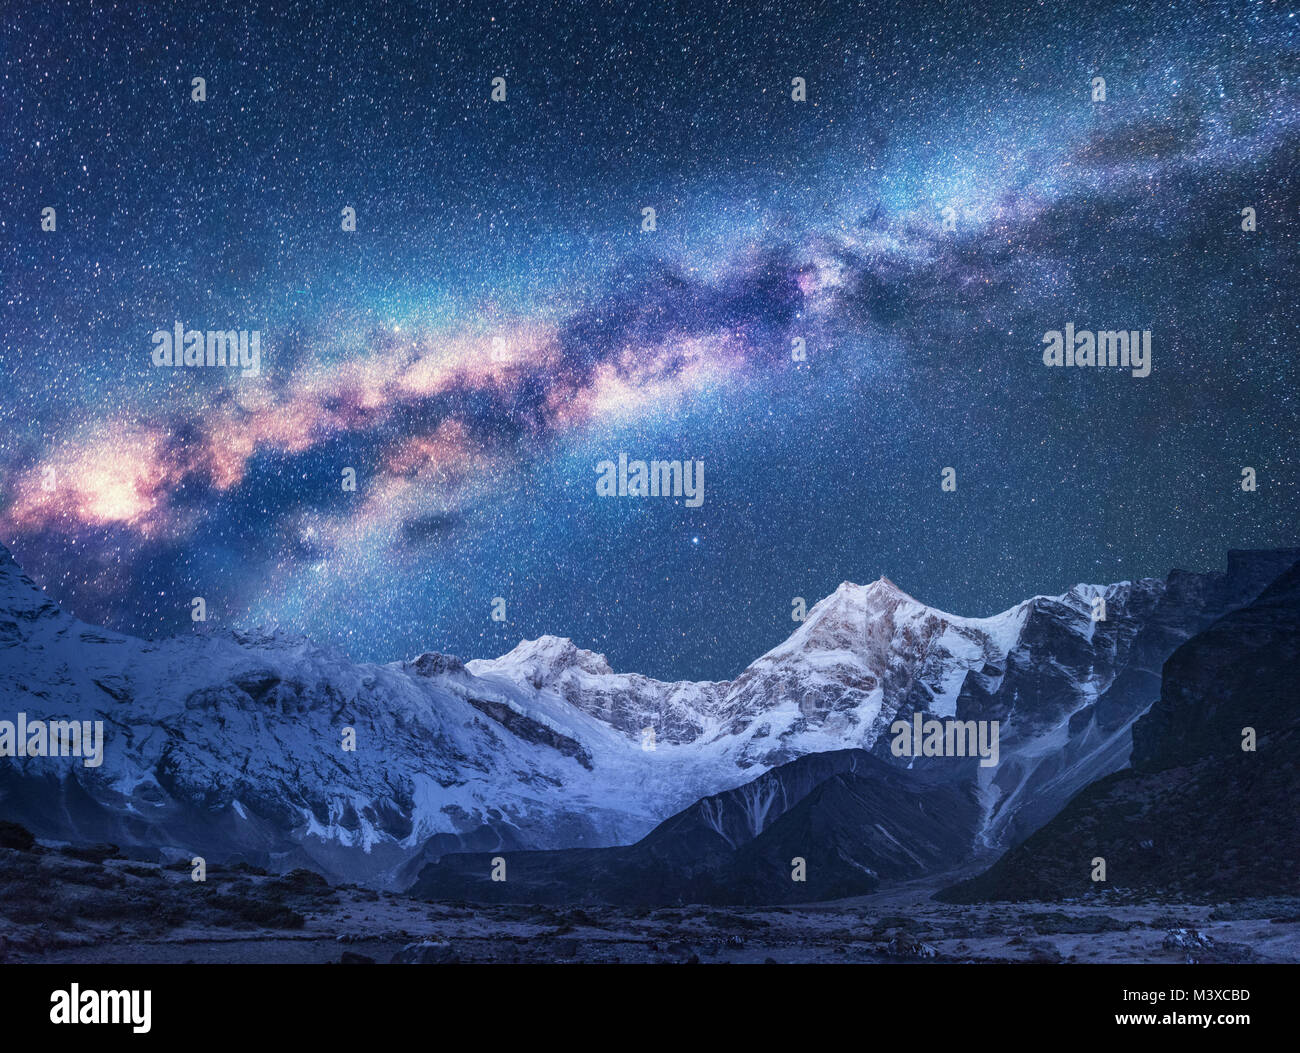 Milky Way And Mountains Printable Canvas Amazing Scenery With Night Himalaya Mountains And Starry Sky In Nepal Canvas Photography Decor Art